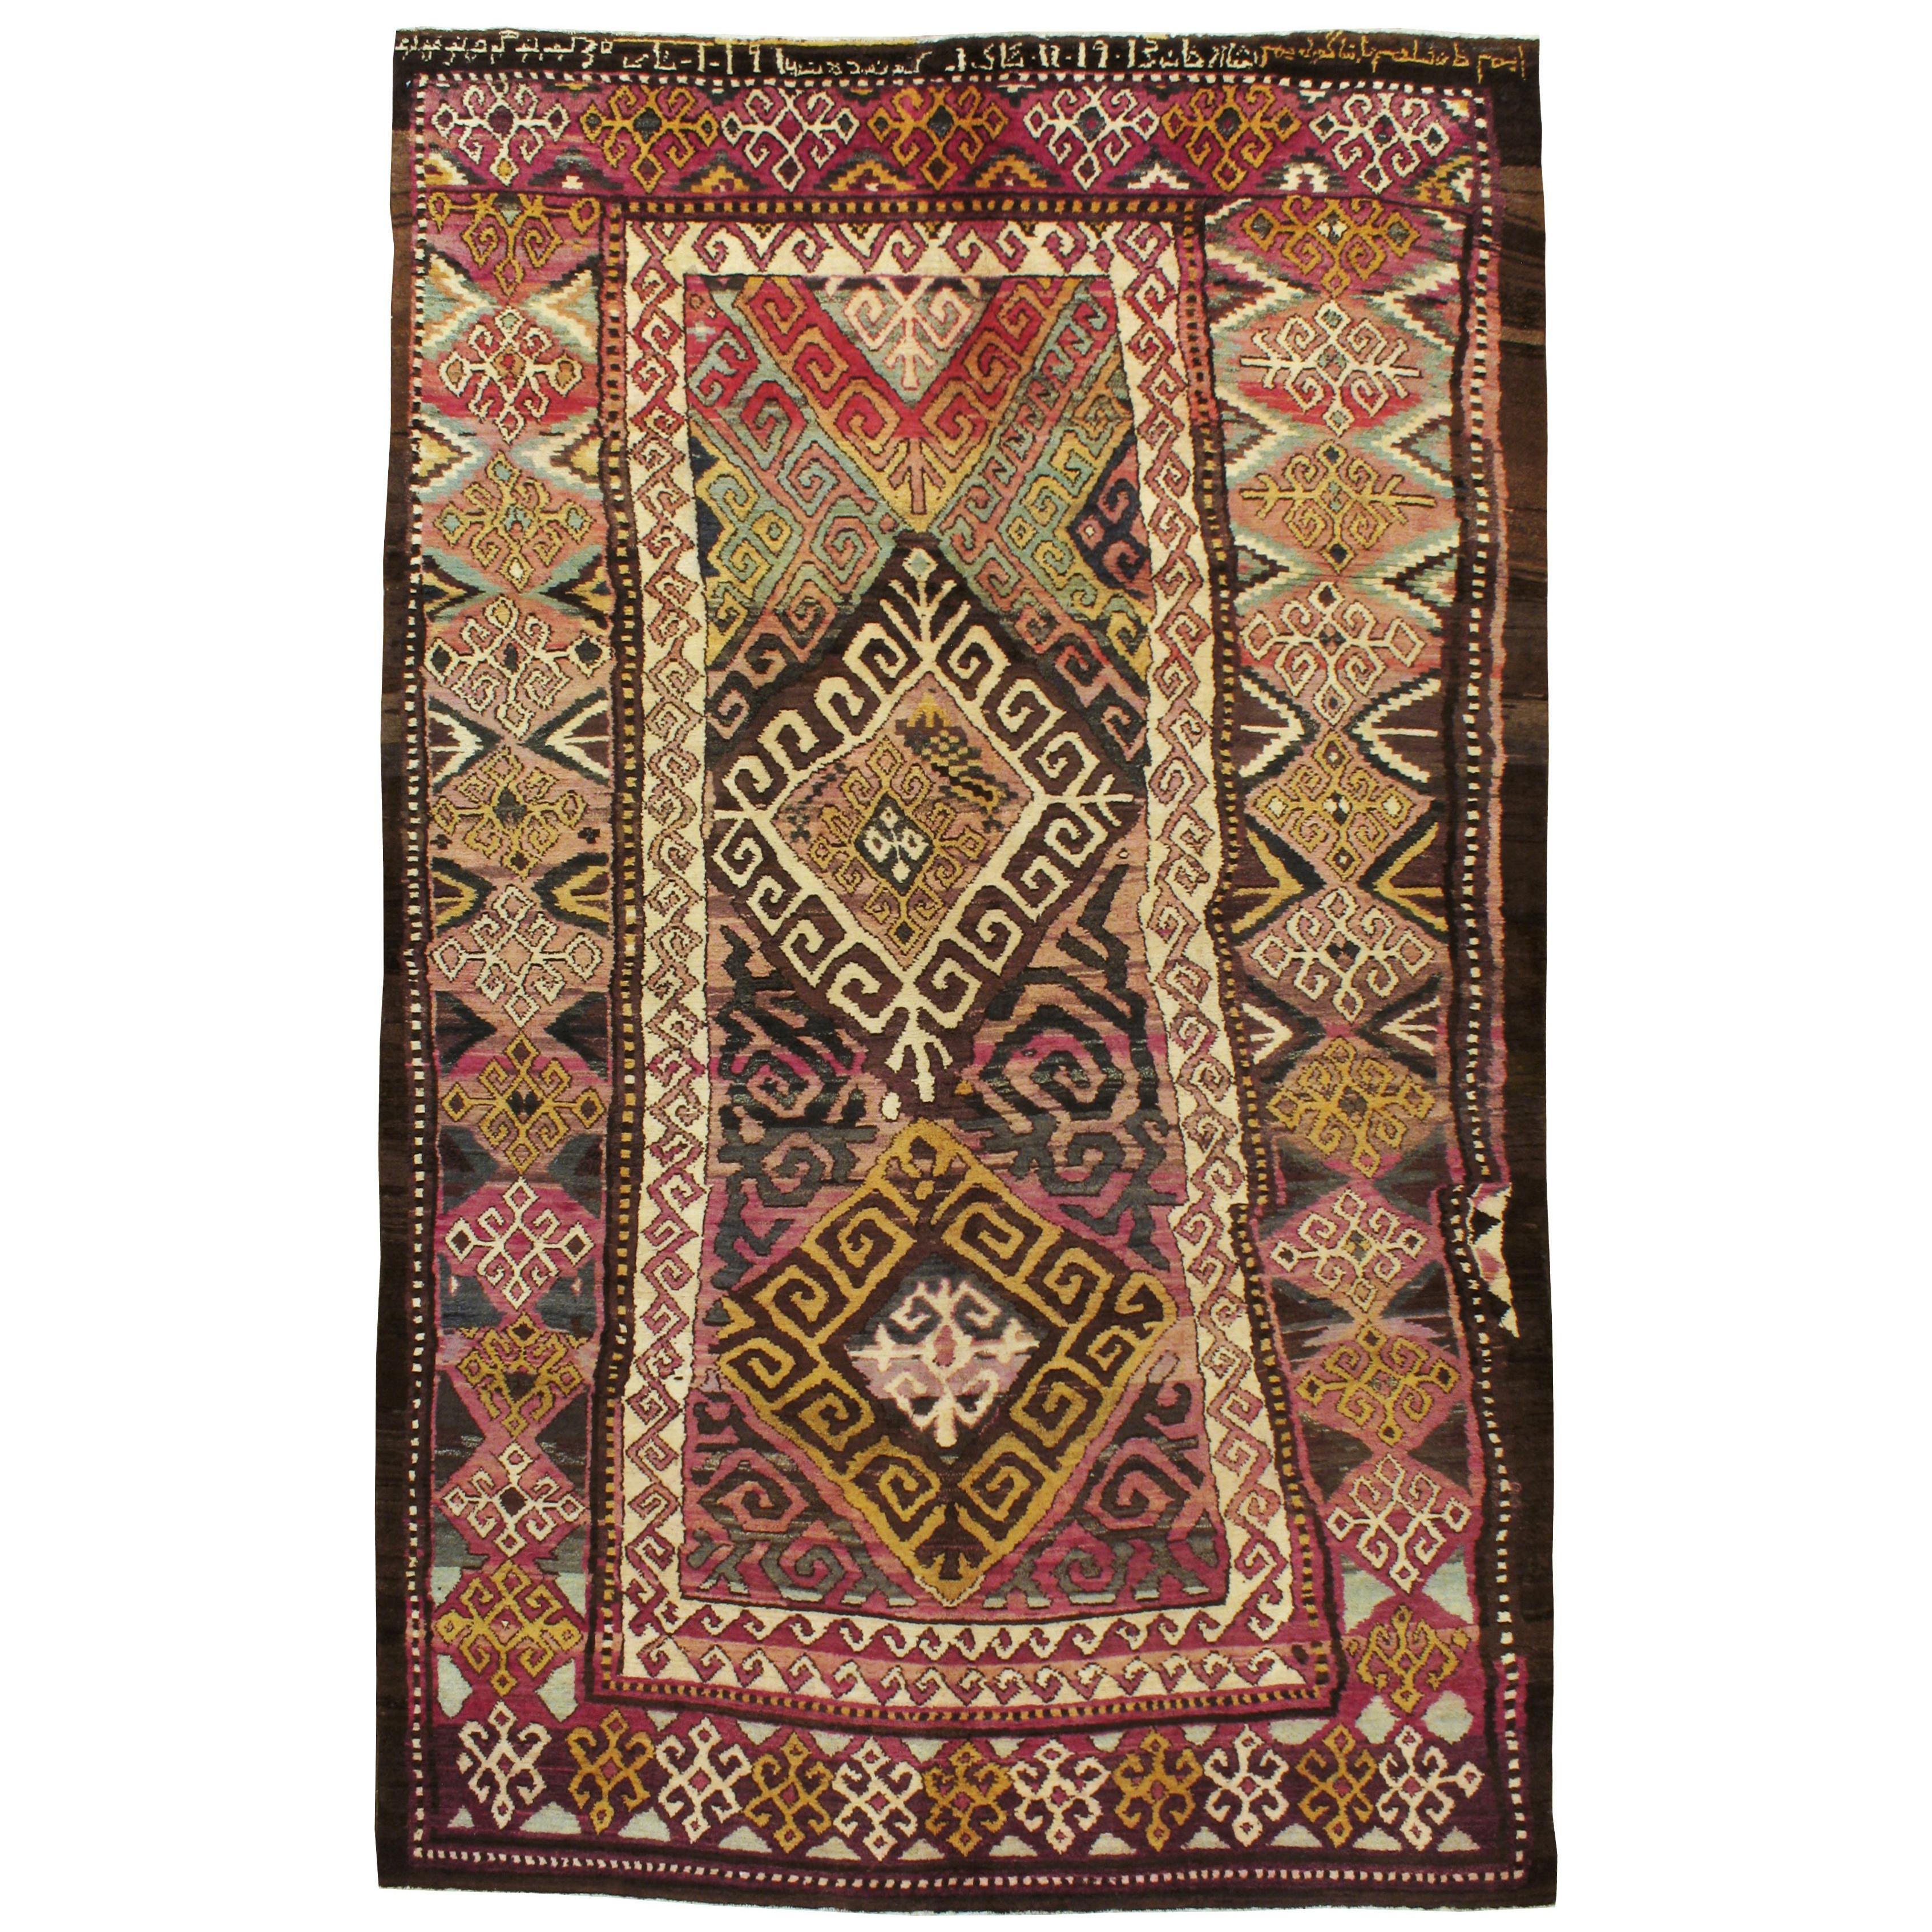 Unique Early 20th Century Abstract Persian Tribal Accent Rug